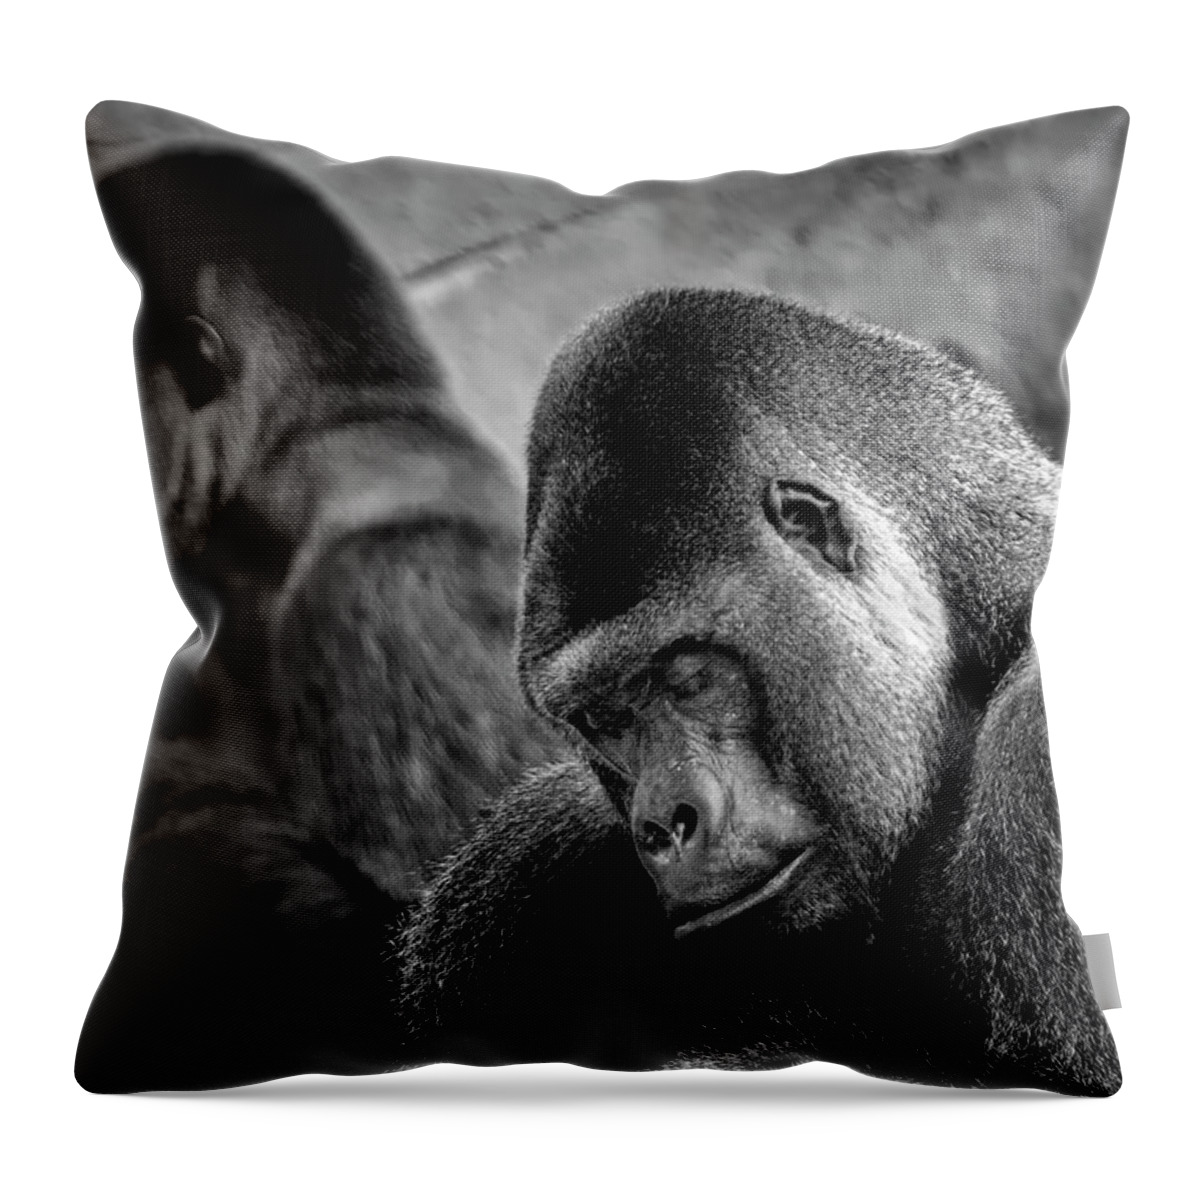 Sleeping Throw Pillow featuring the photograph Sleeping Giant by Bill Dodsworth